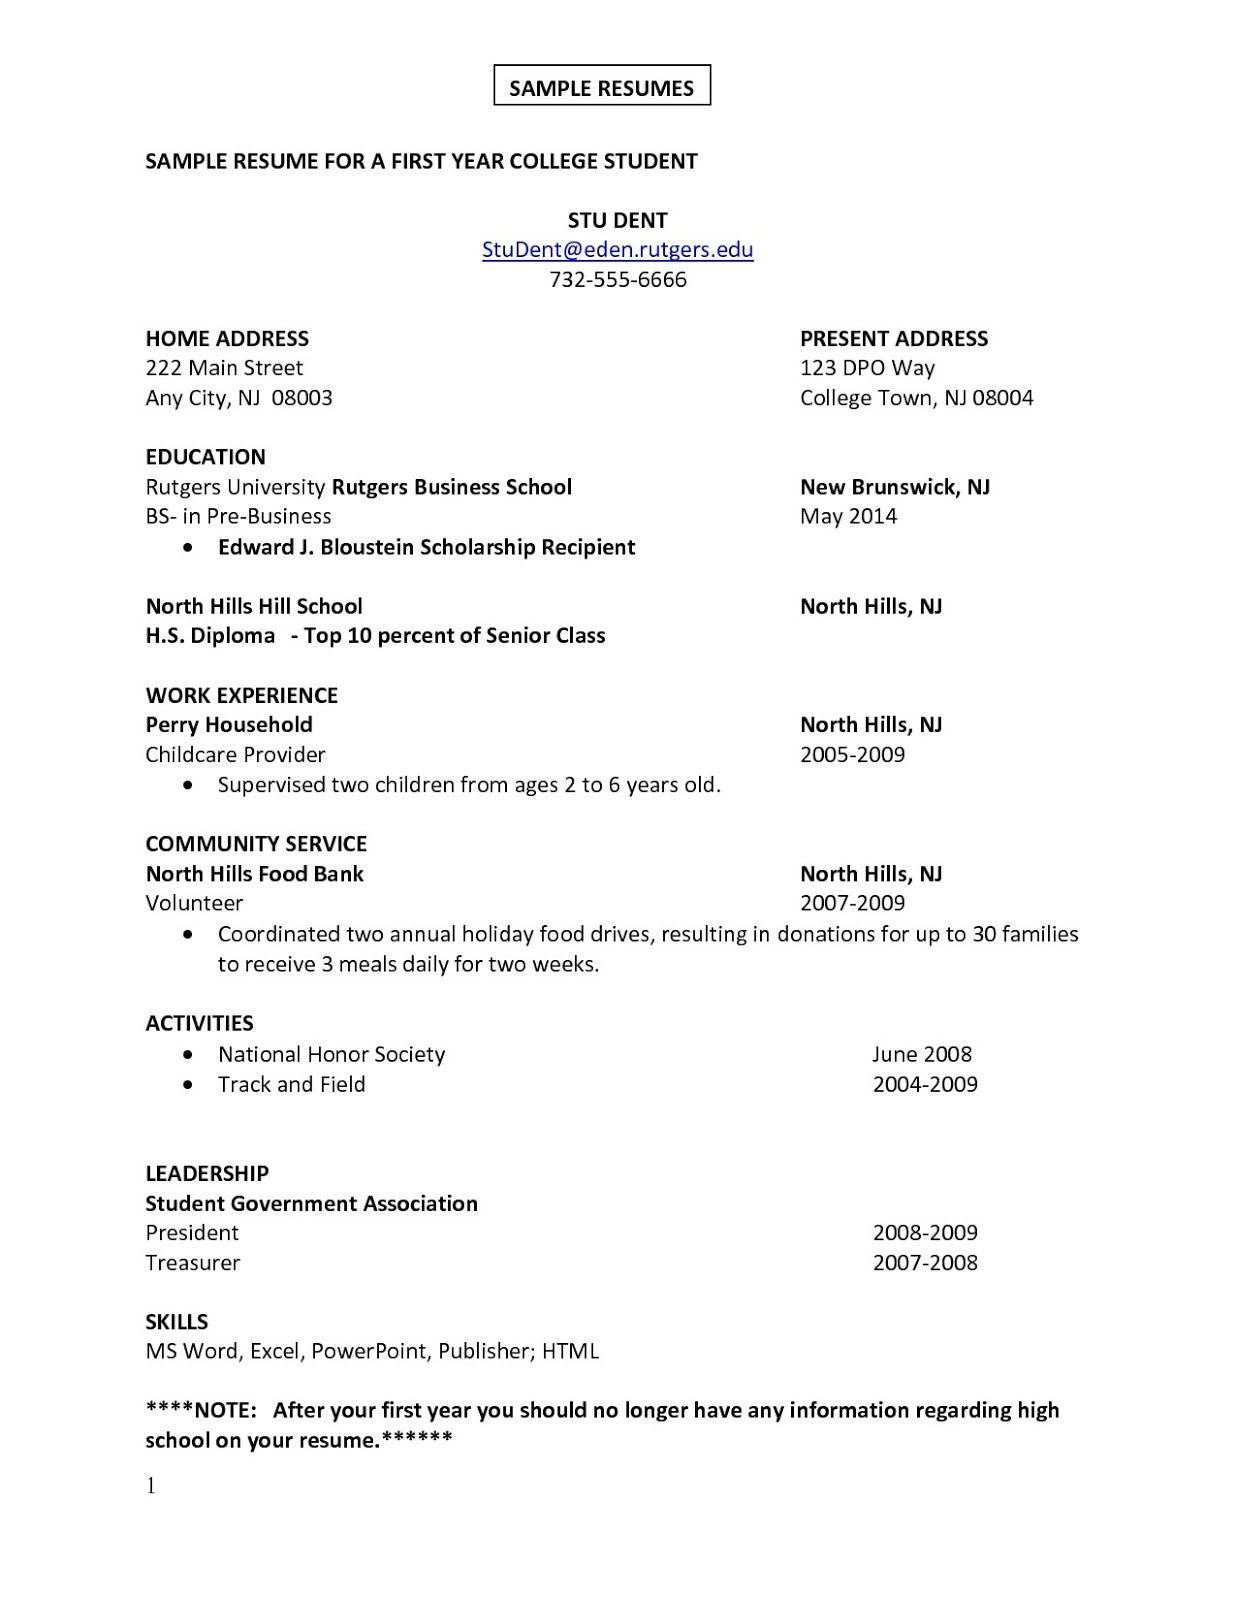 Basic Resume Template for First Job First Job Sample Resume Sample Resumes First Job Resume, Job …